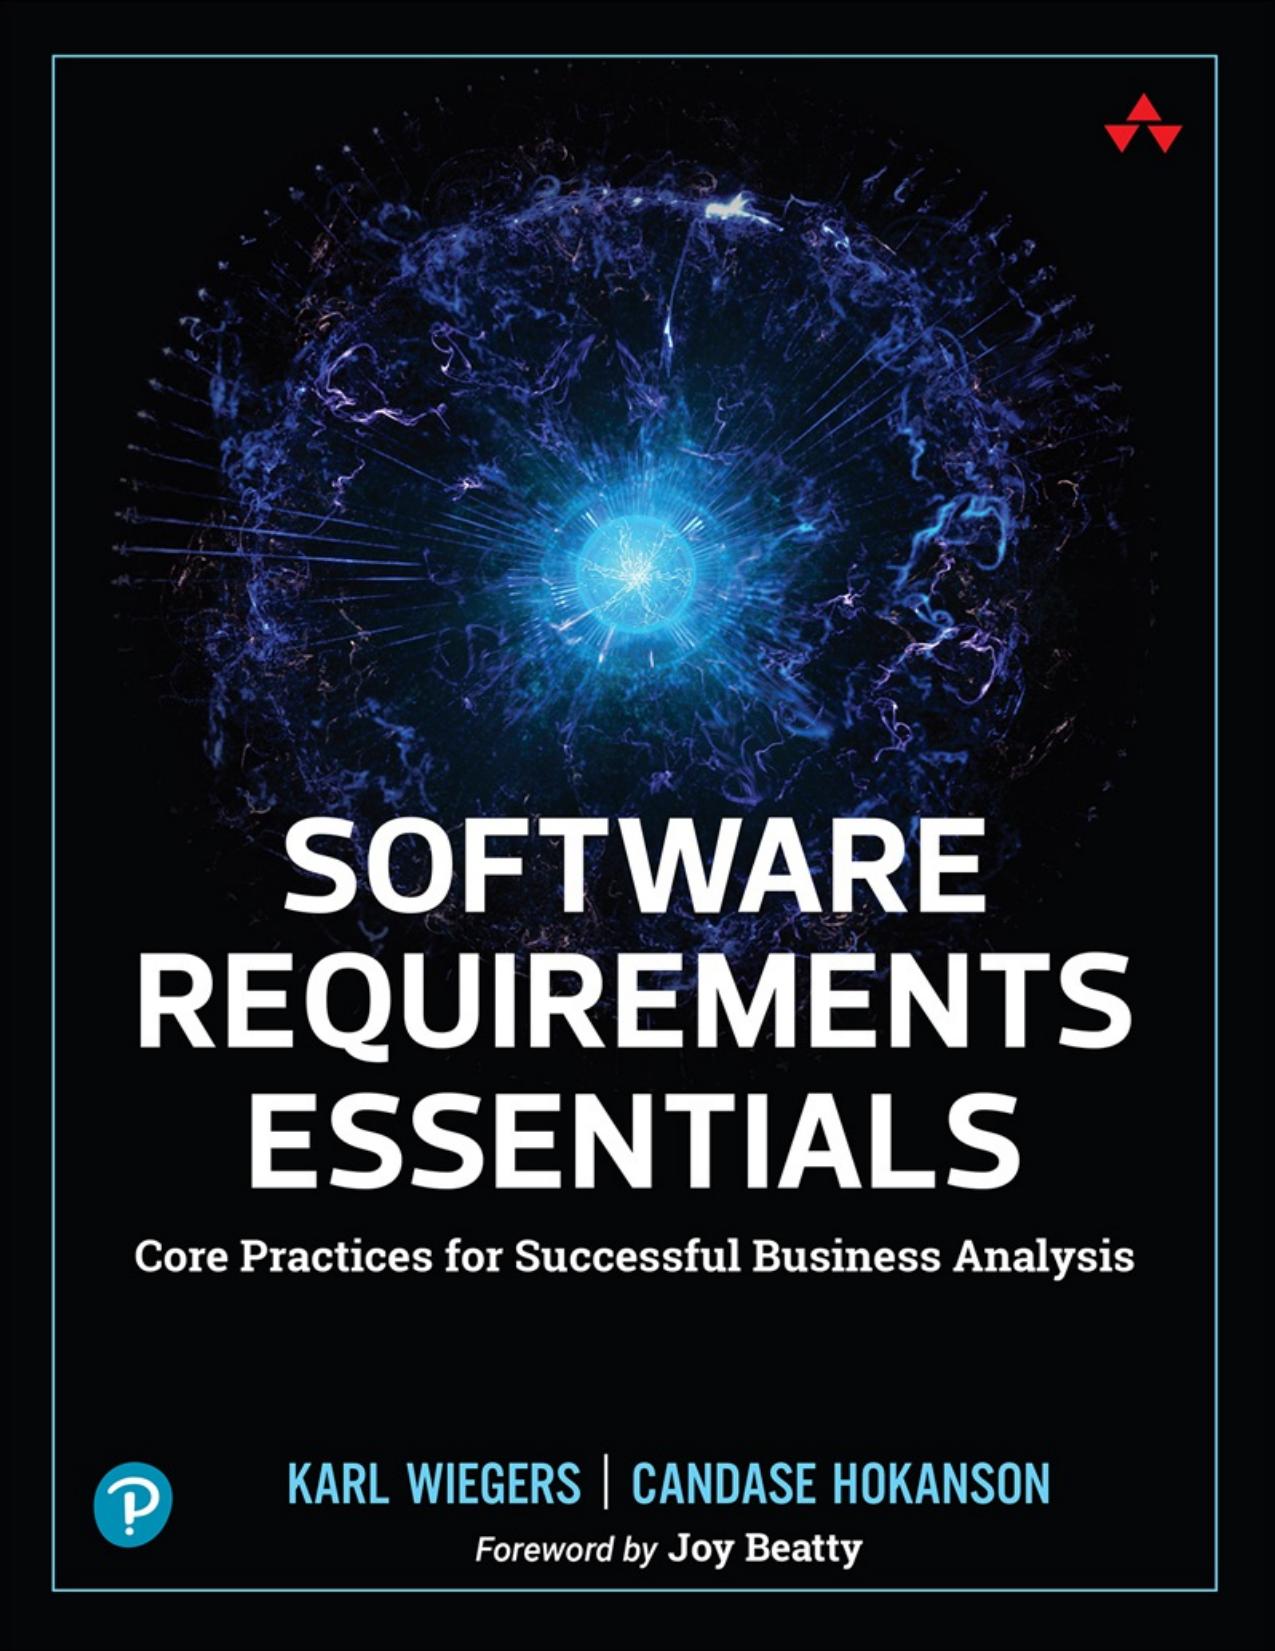 Software Requirements Essentials: Core Practices for Successful Business Analysis (for True EPUB) by Karl Wiegers & Candase Hokanson